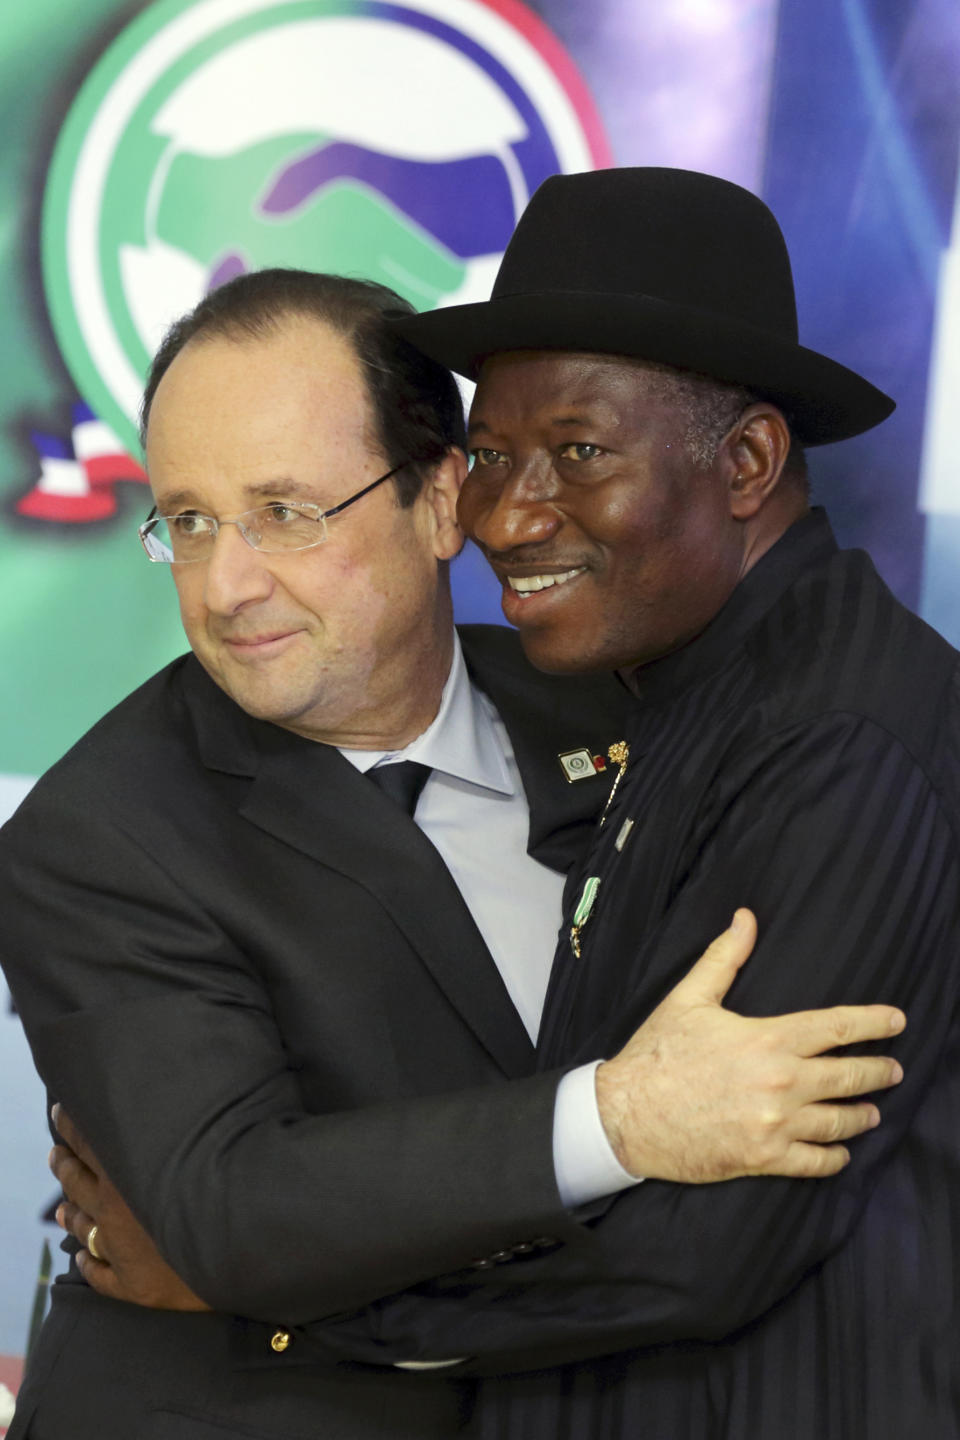 Nigerian President Goodluck Jonathan, right, embraces French President Francois Hollande after they opened the Nigeria-France business forum in Abuja, Nigeria, Thursday, Feb. 27, 2014. Hollande is in Nigeria for a one-day official visit. (AP Photo/Philippe Wojazer, Pool)